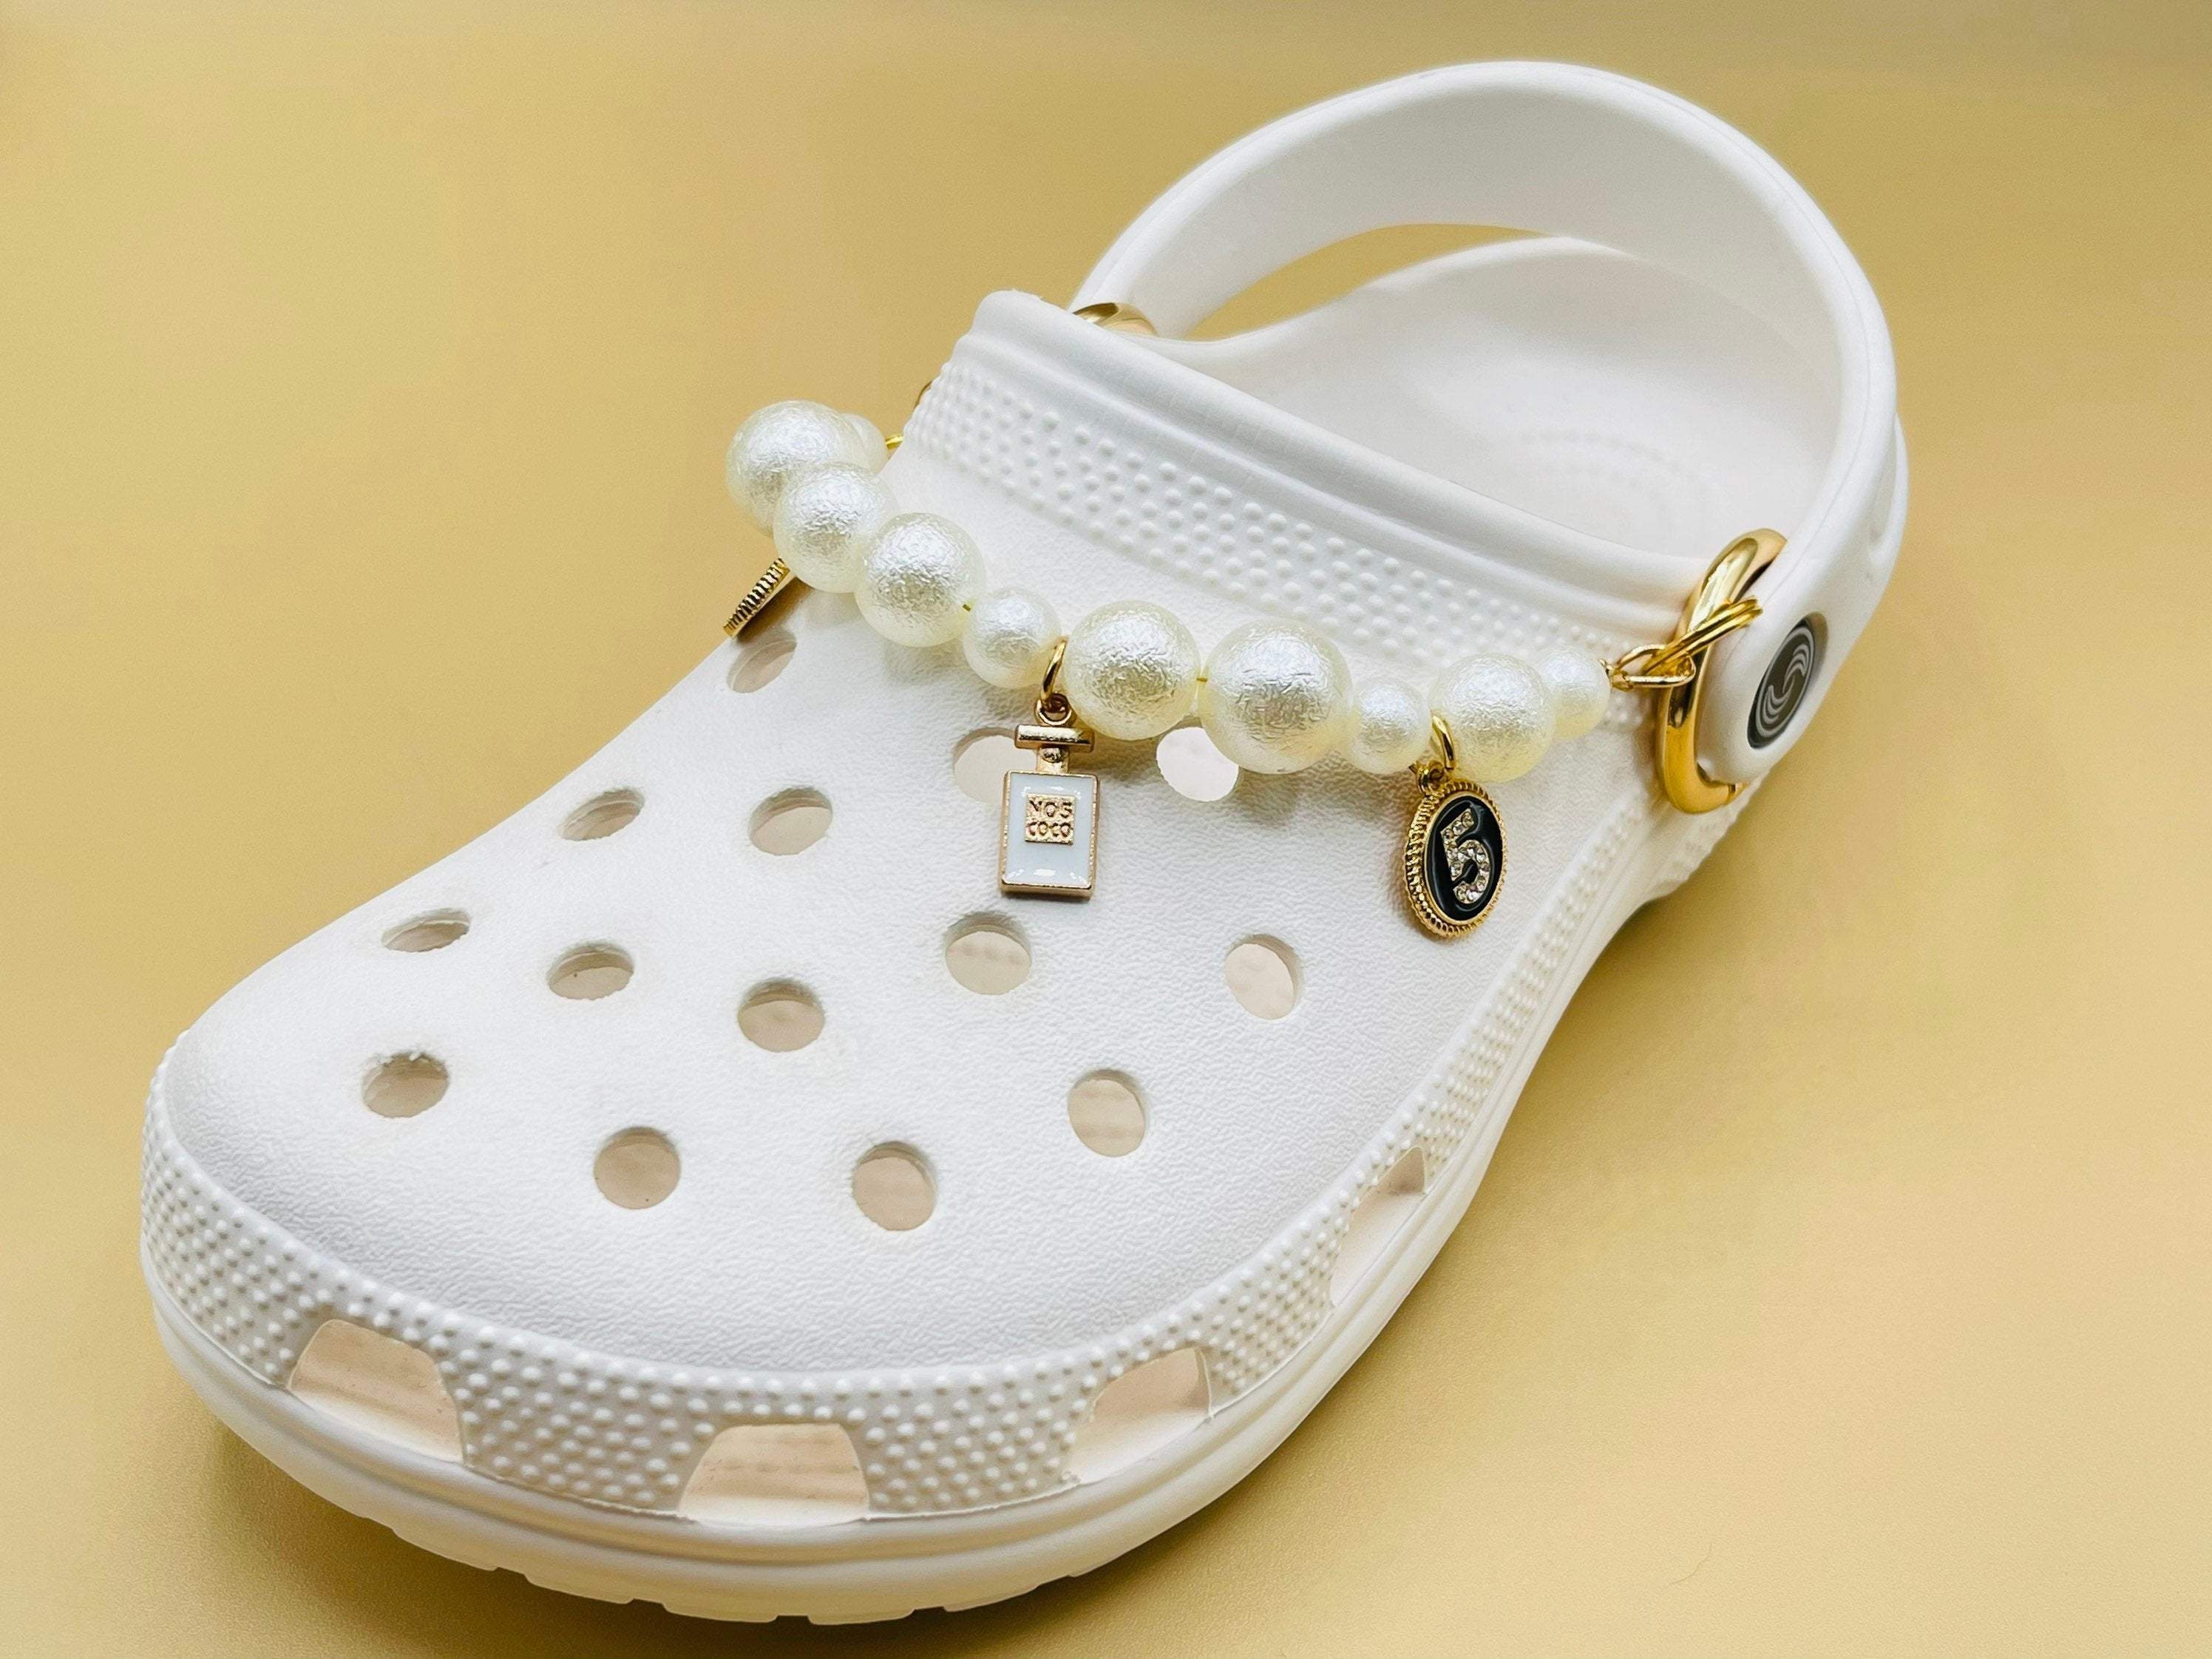 Croc Charms Gold Diamonds and Pearls Set. Charms for Your Crocs, Croc Accessories for Girls and Adult Women